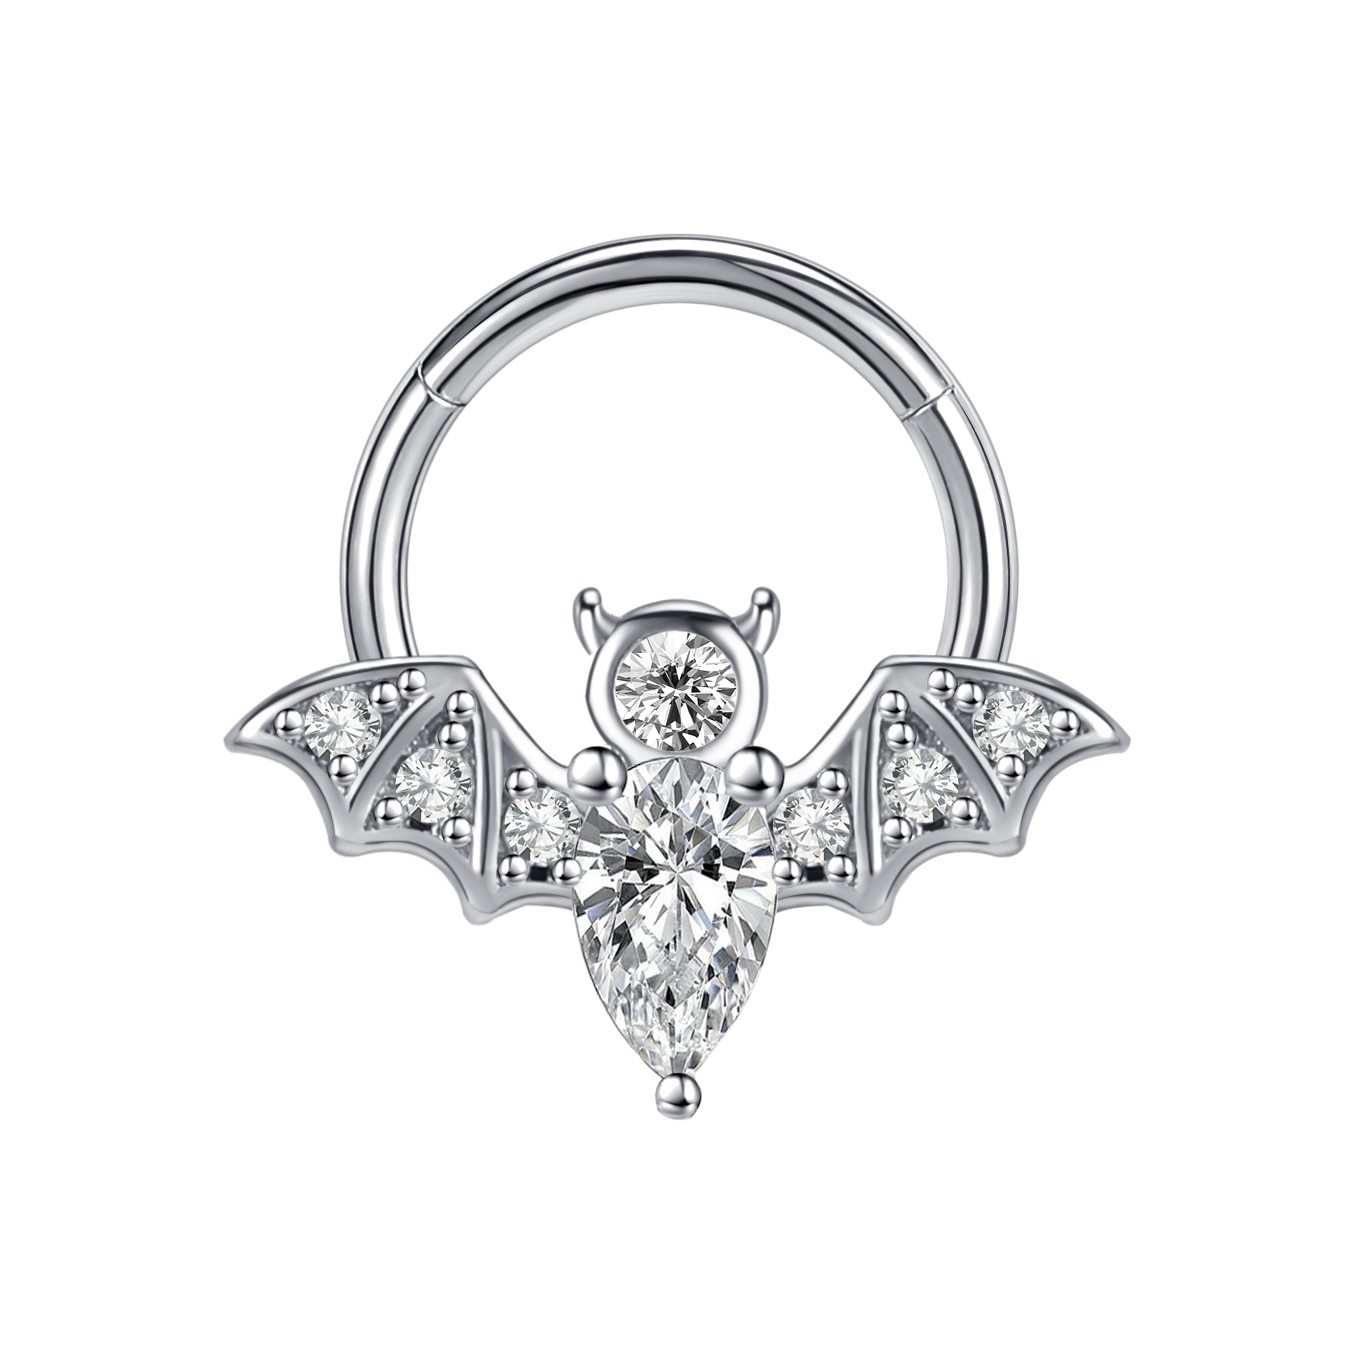 Primary image for 16g Stainless Steel Crystal Septum Nose Ring Hoop Nose Piecring Bat Bee Septum C